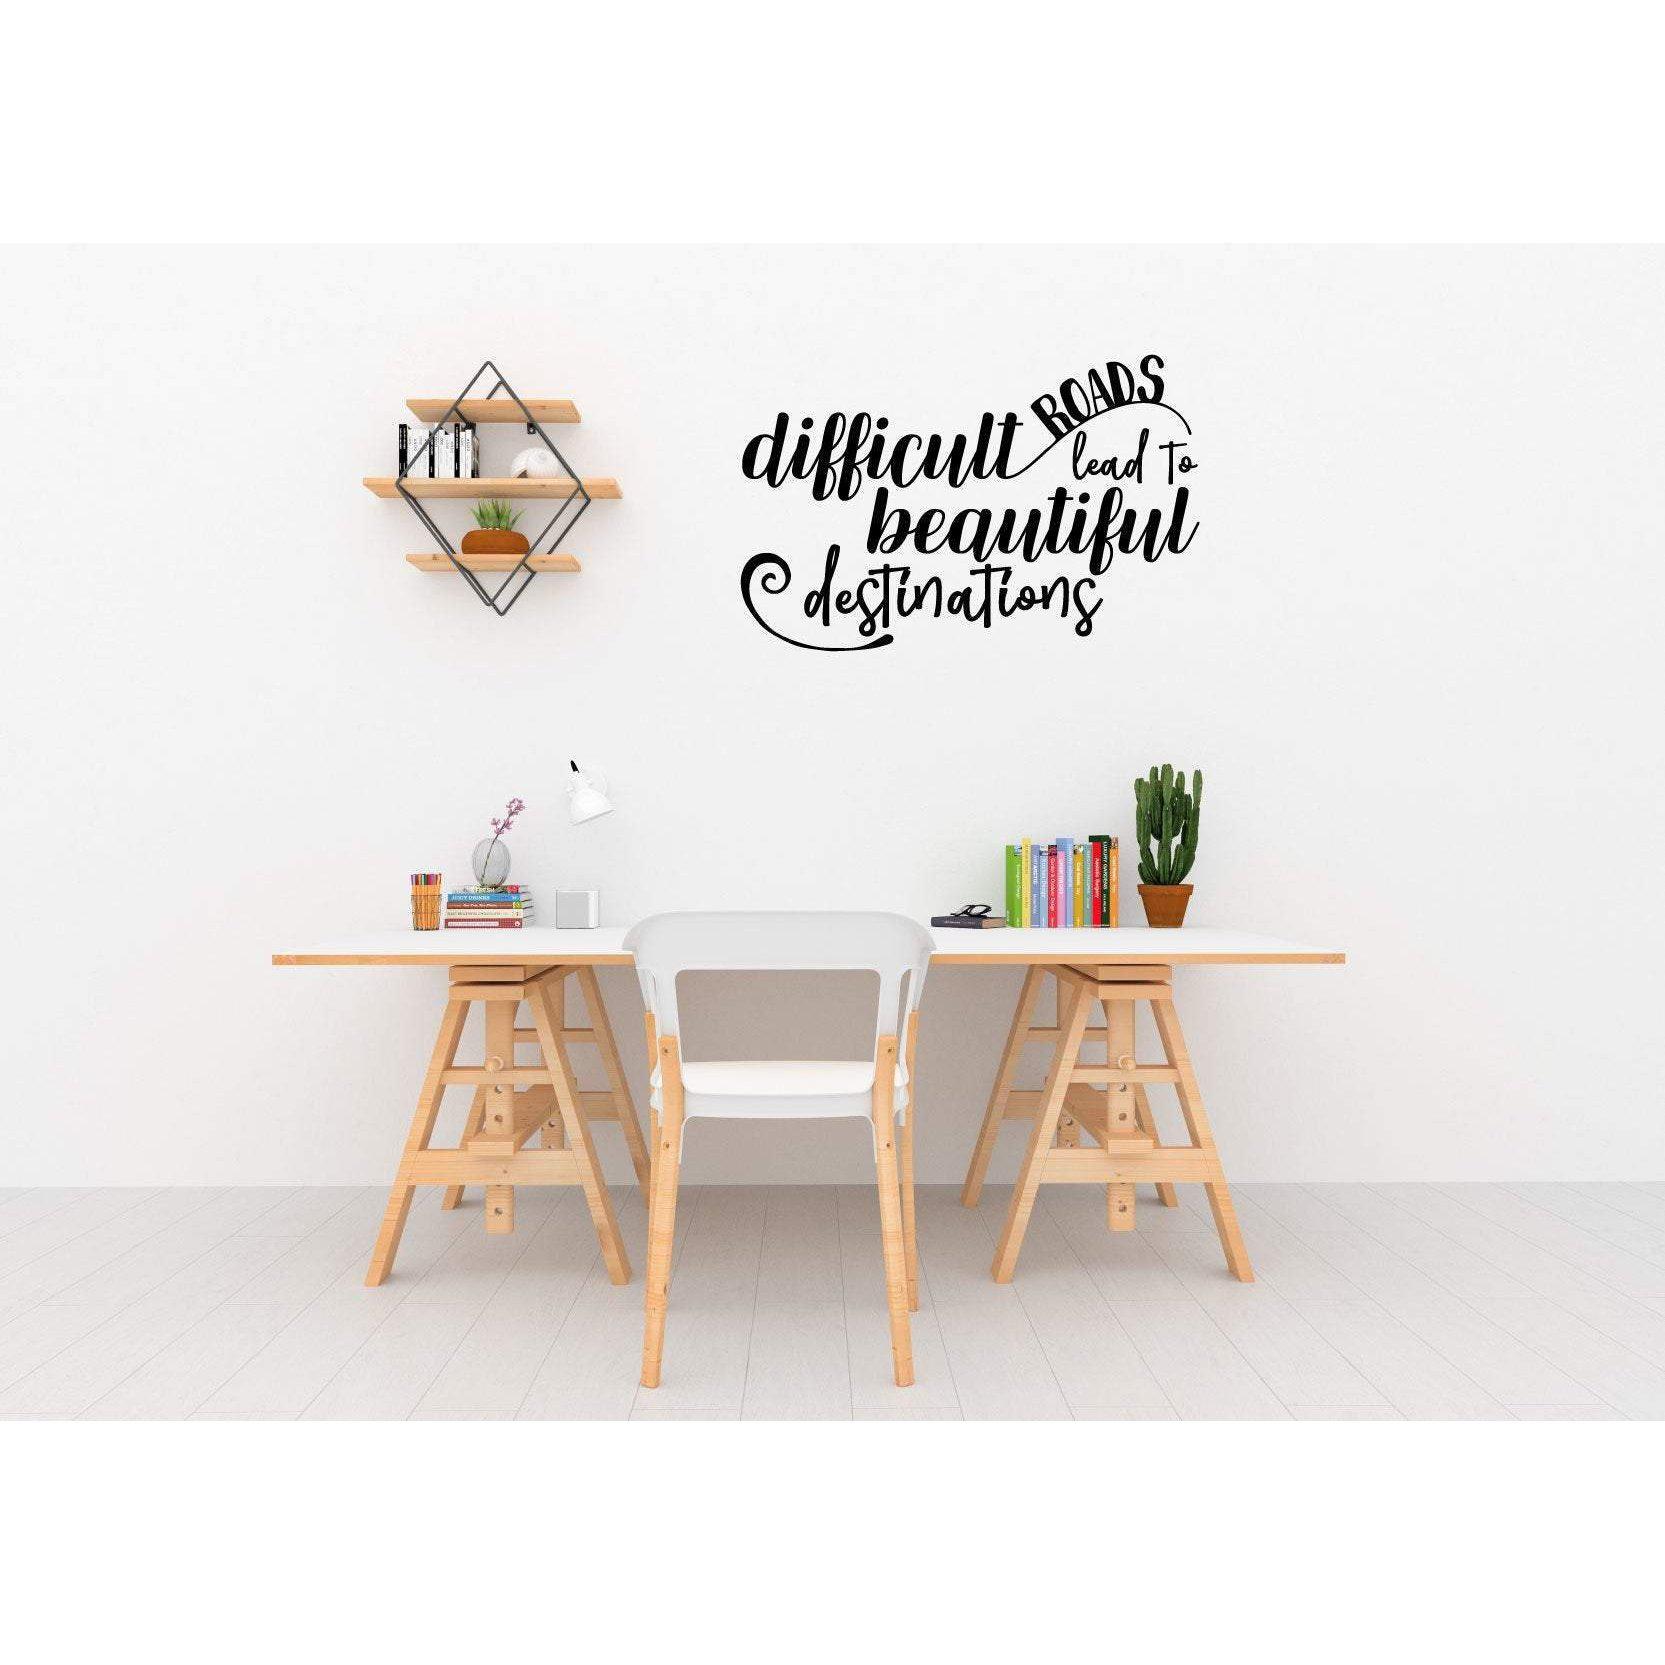 Difficult Roads Beautiful Destinations Wall Sticker Quote, Wall Decal Quote, Motivational Wall Sticker, Positive Wall Decal, Wall Art